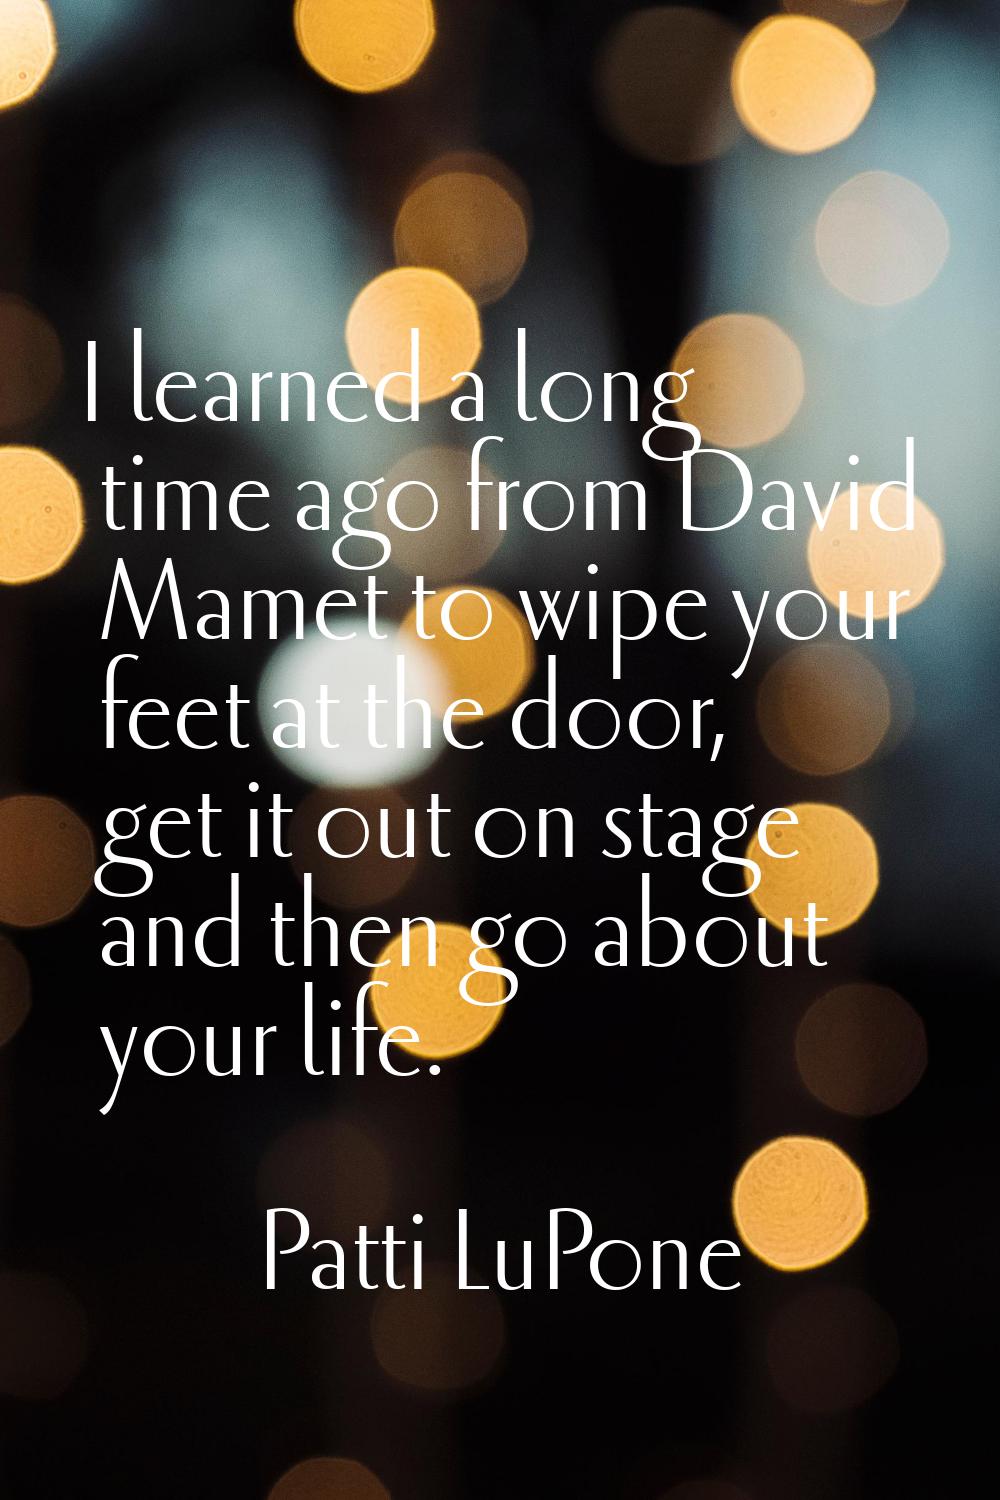 I learned a long time ago from David Mamet to wipe your feet at the door, get it out on stage and t